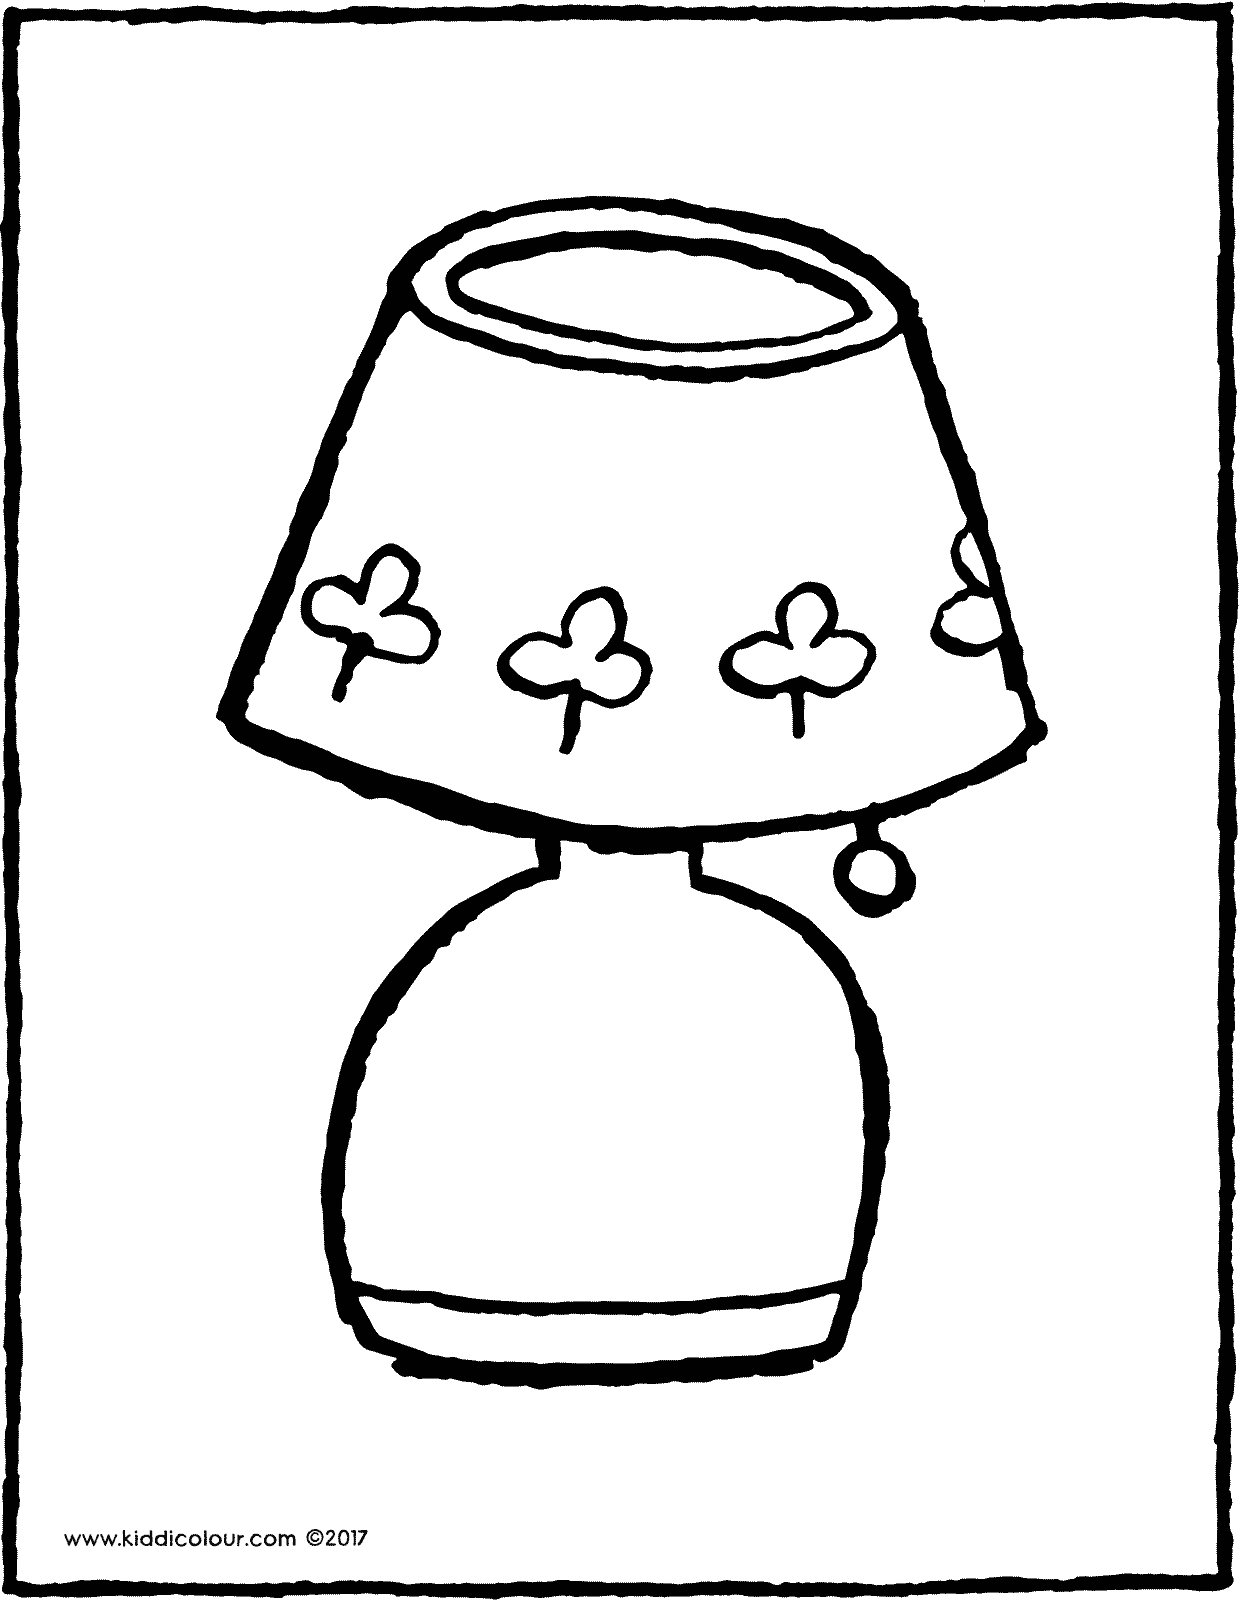 Lamp Coloring Page At GetColorings Free Printable Colorings Pages To Print And Color